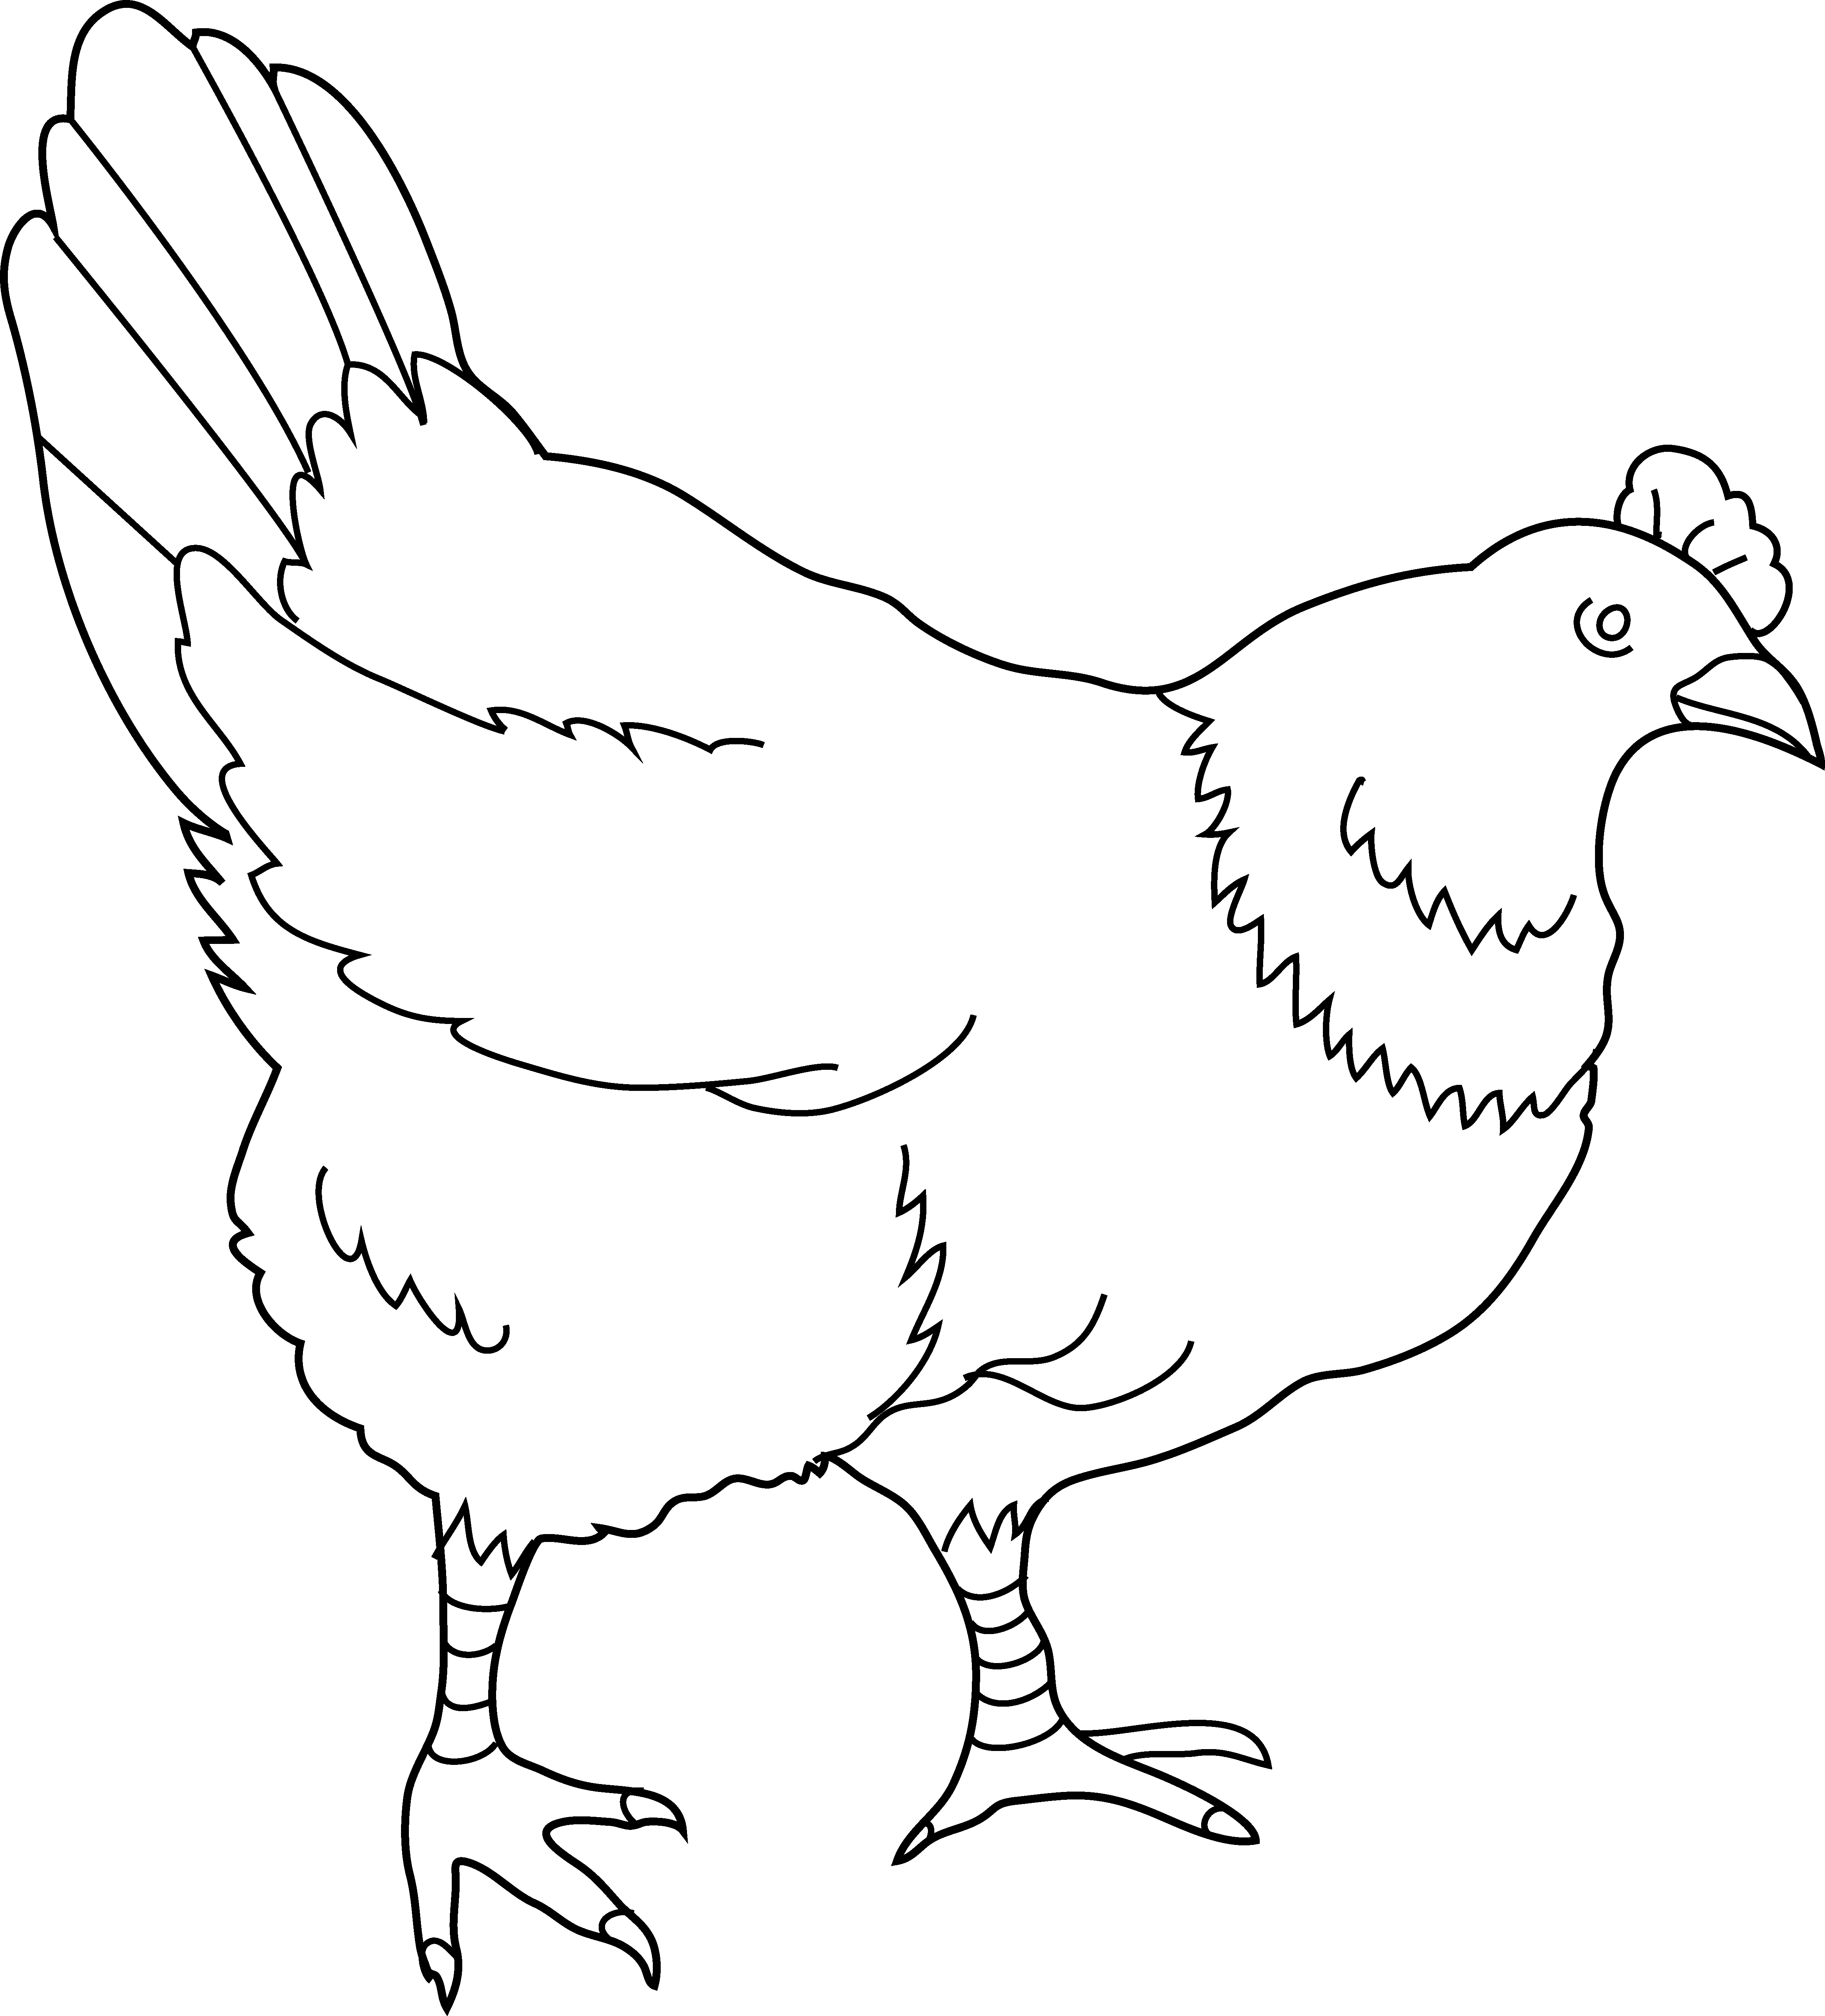 8 Hens Black And White Clipart - Png Download (4856x5363), Png Download.